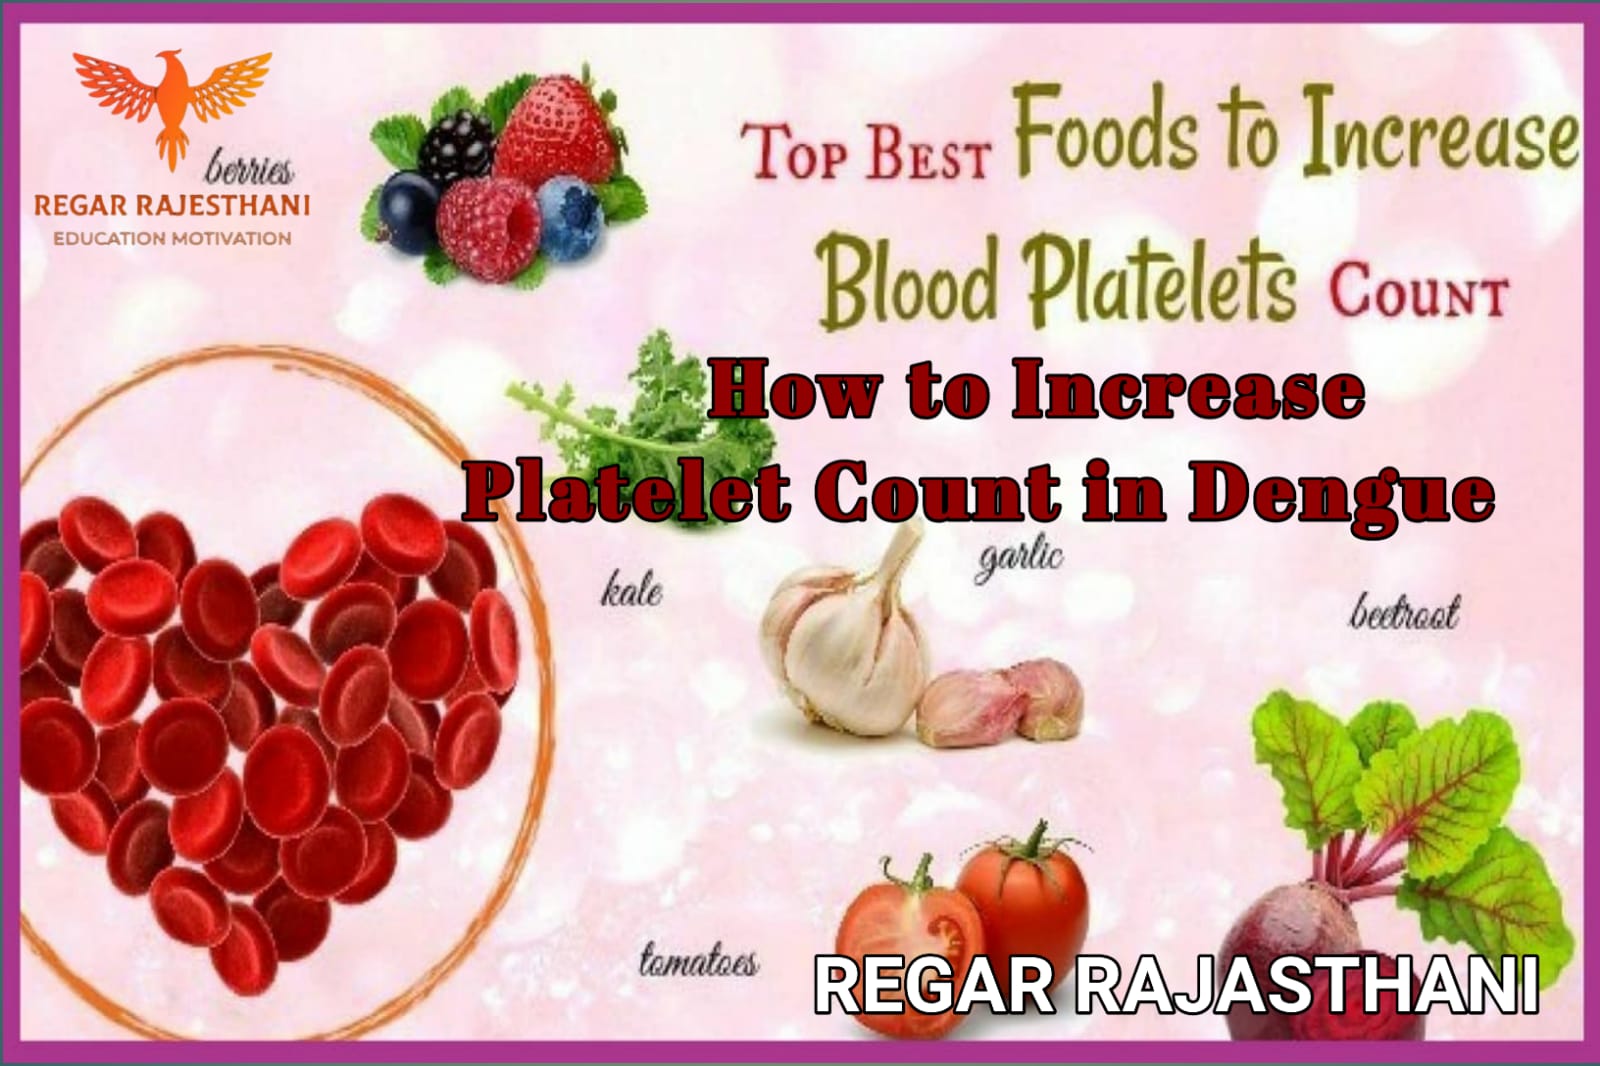 How to Increase Platelet Count in Dengue